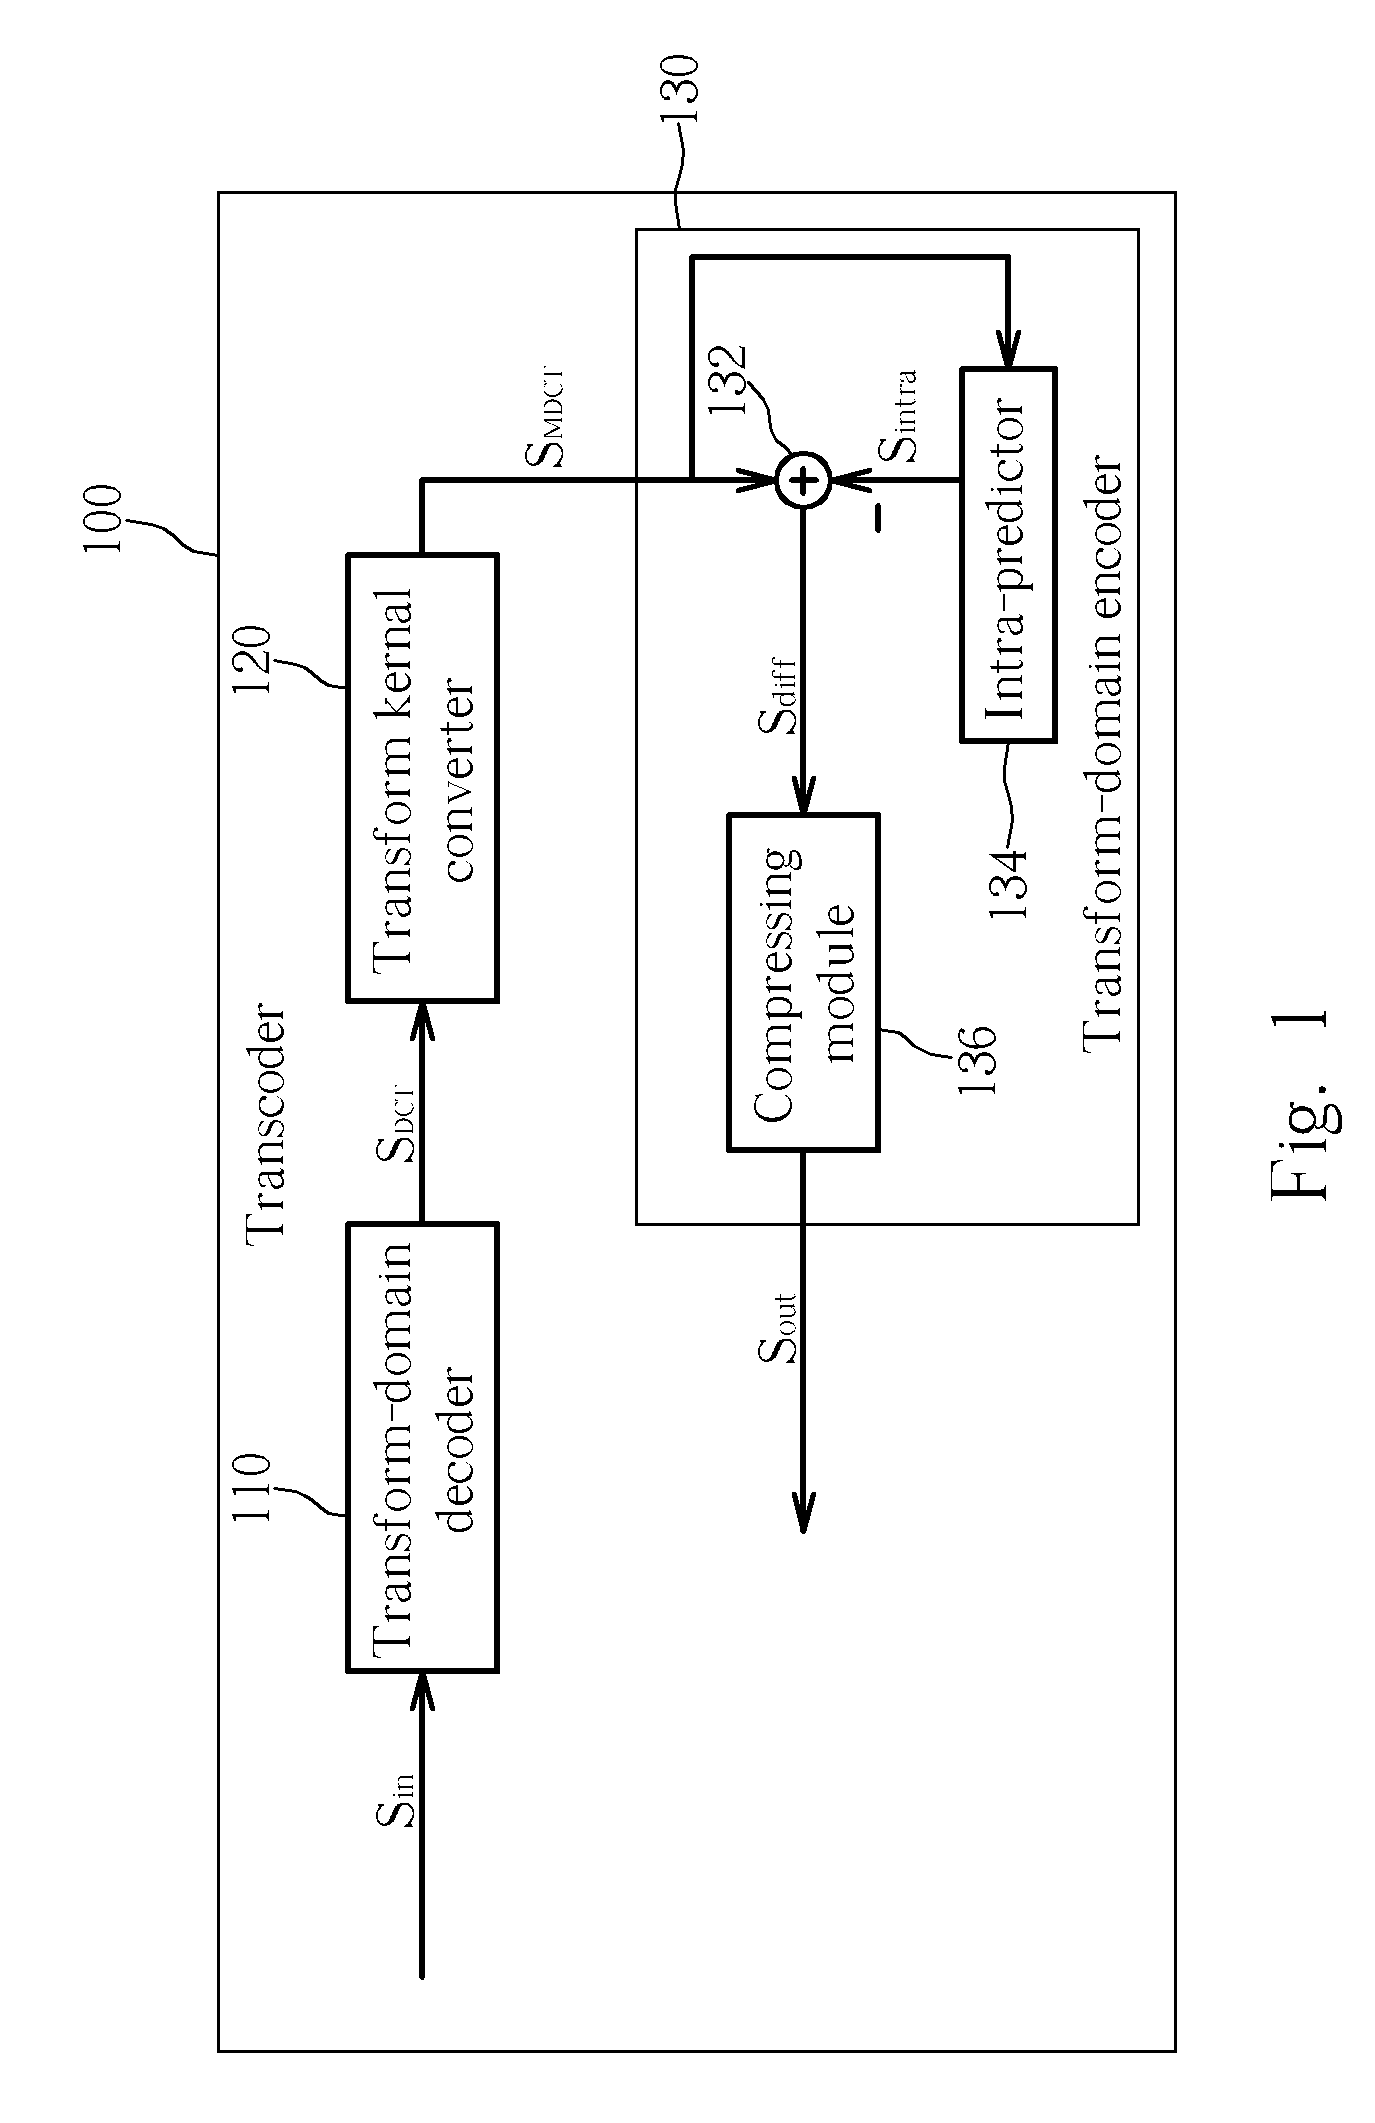 Transcoder and transcoding method operating in a transform domain for video coding schemes possessing different transform kernels